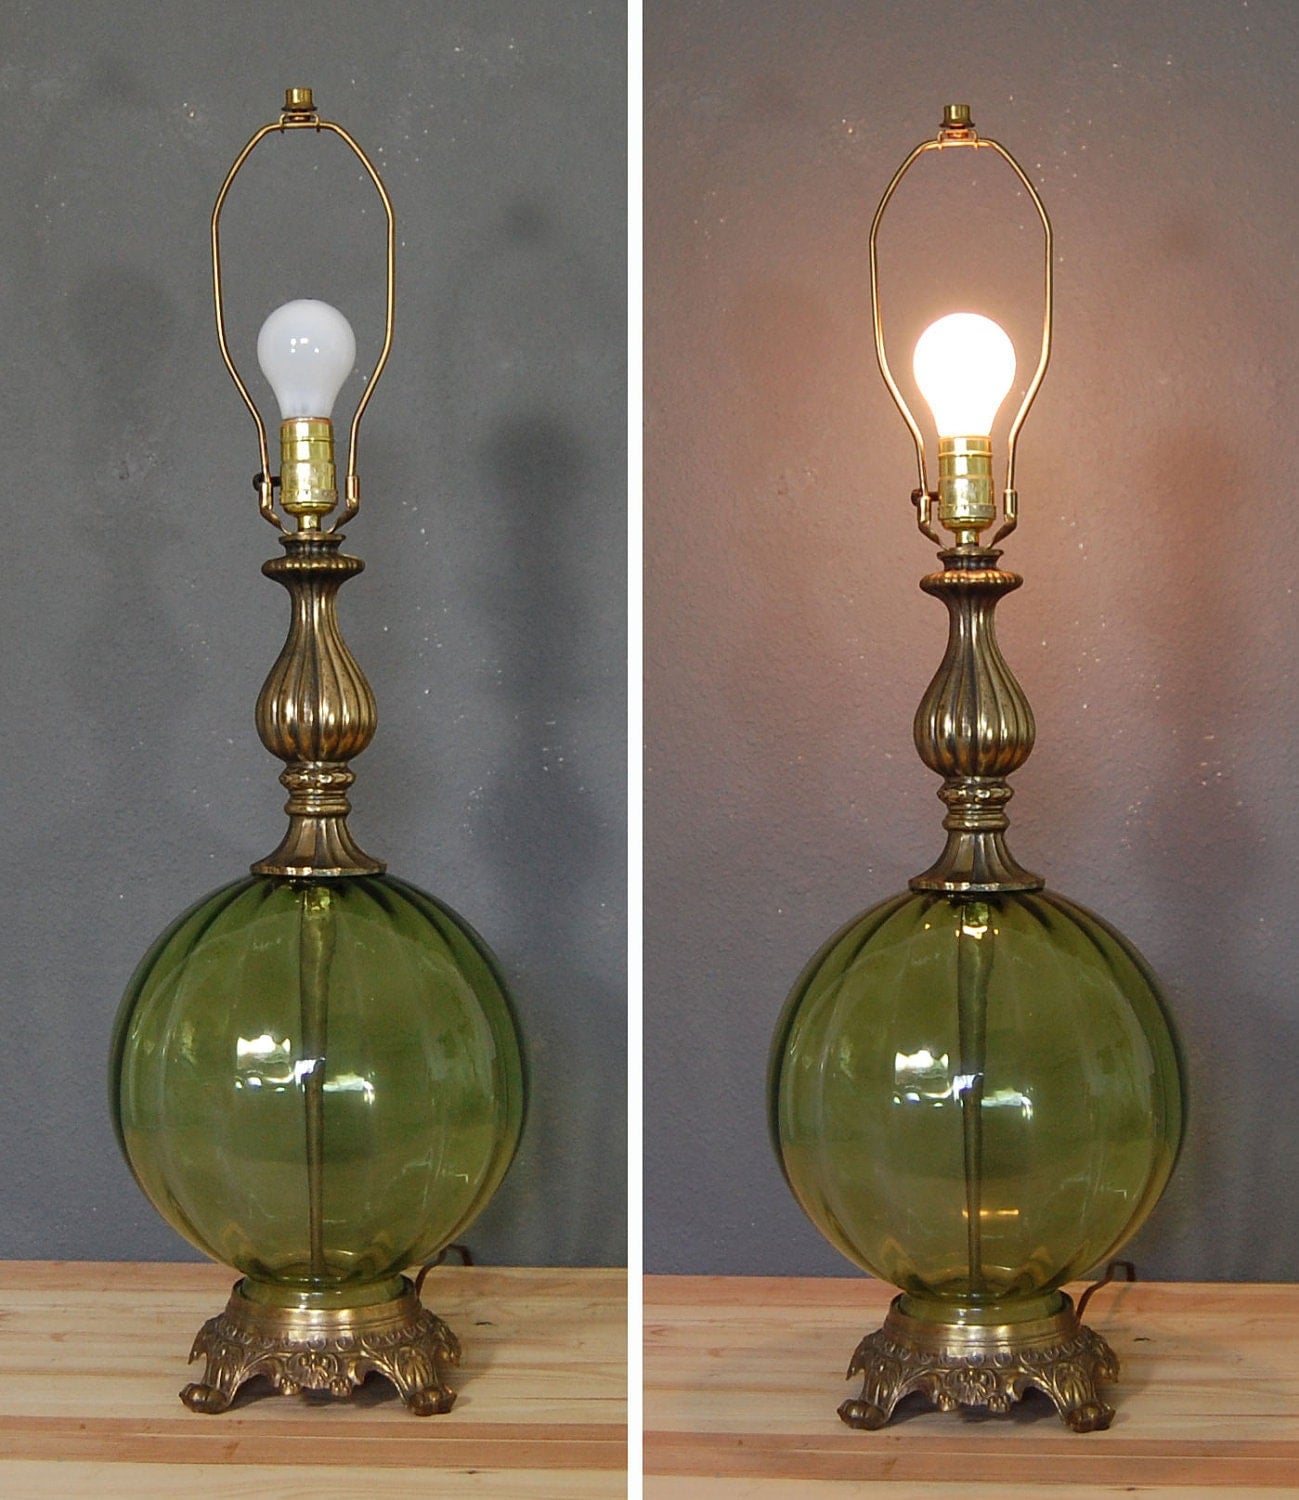 Vintage Table Lamp Green Glass Lamp By Naturalstatevintage